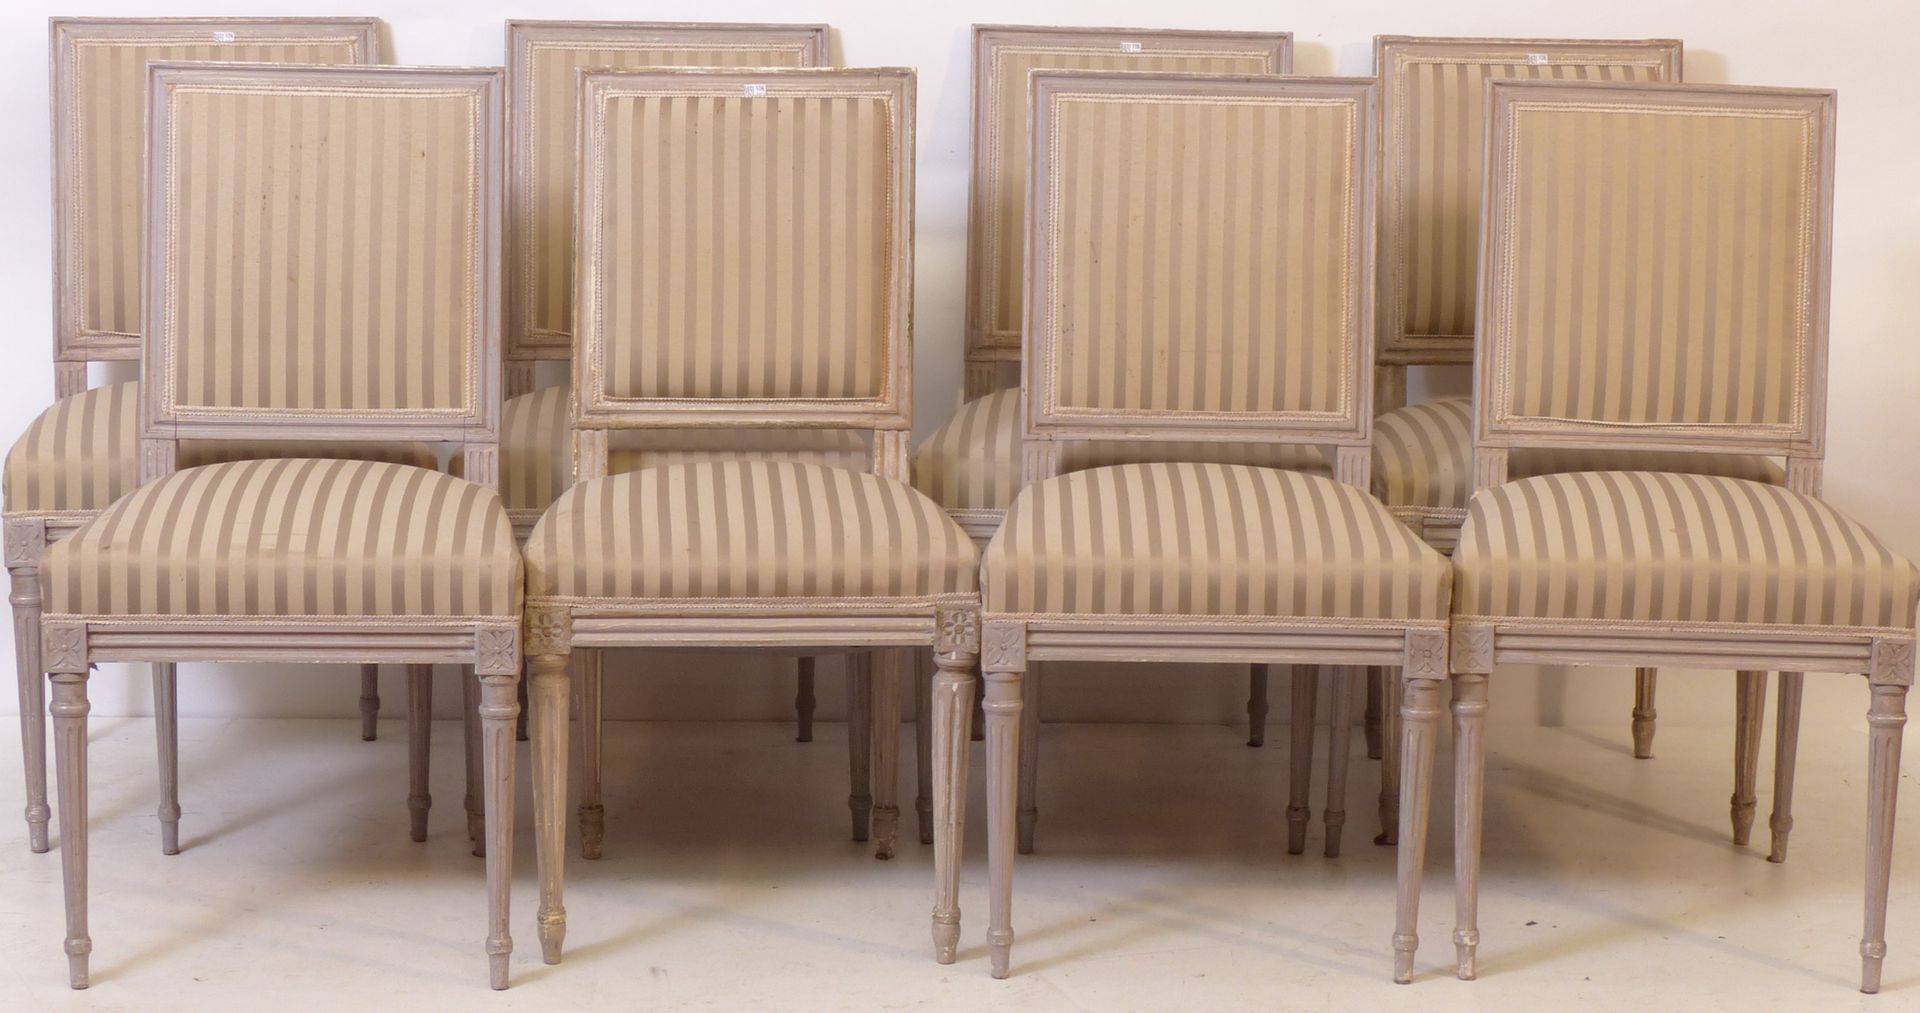 Null Suite of 8 chairs in the Louis XVI style.